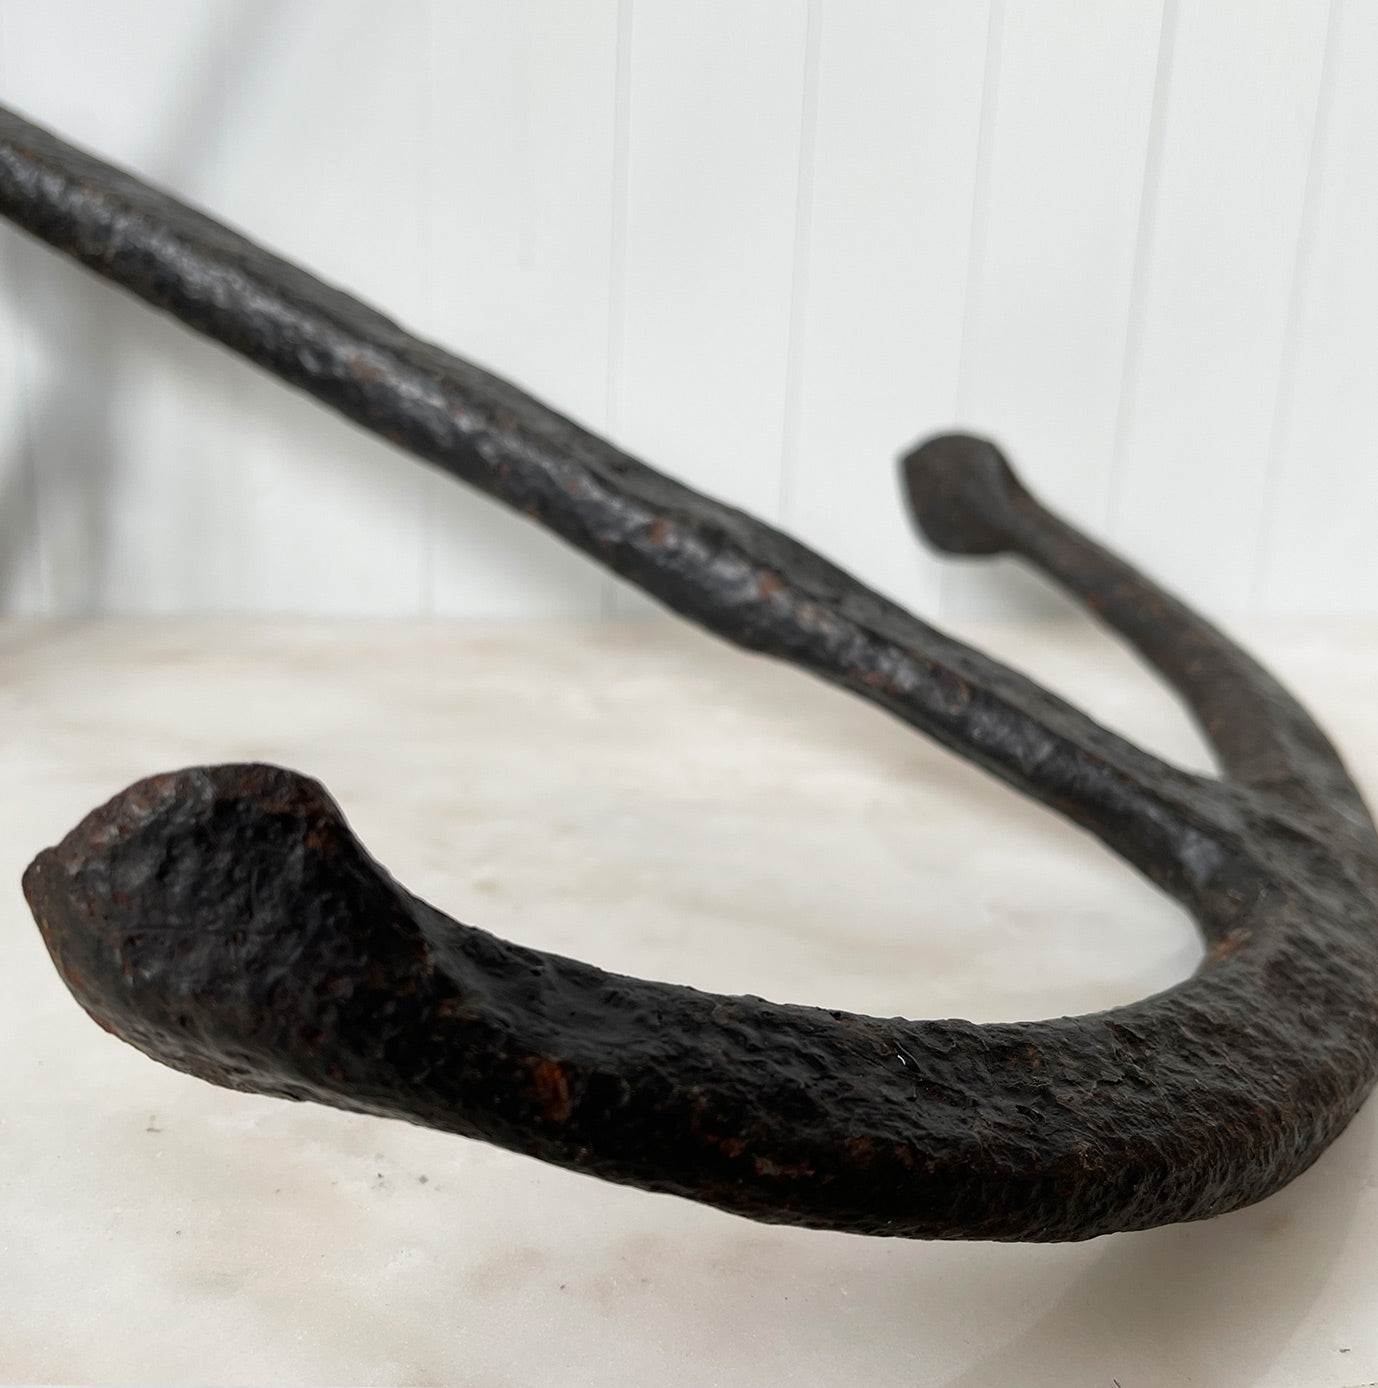 Great looking Vintage Anchor with great wear and Age. Would look great as a doorstop in the house or as a decoration in the garden next to some old pots - SHOP NOW - www.intovintage.co.uk